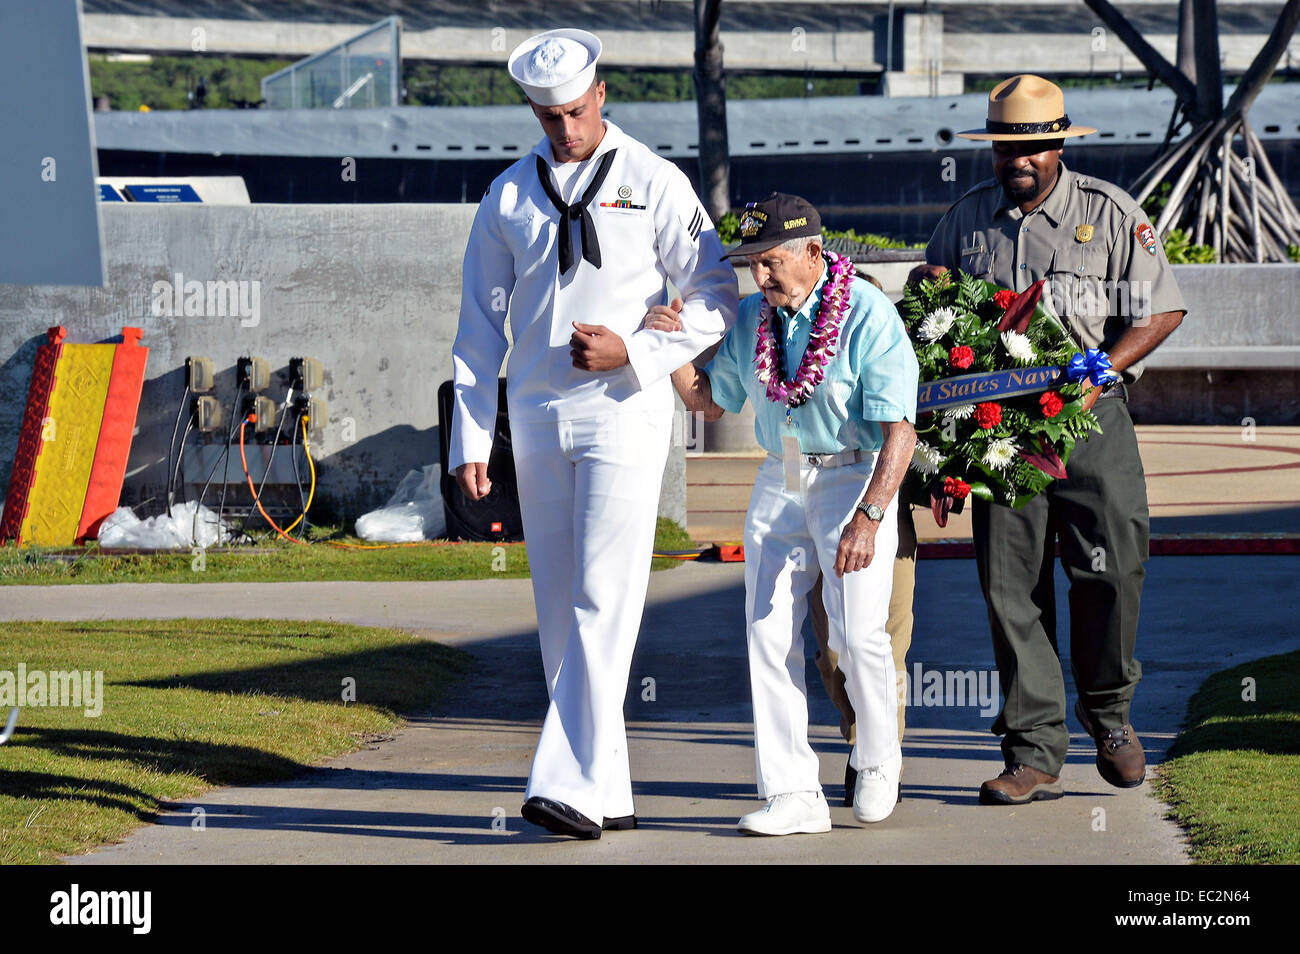 Pearl Harbor survivor John Chapman, center, is escorted during a wreath ceremony at the 73rd Anniversary commemoration at the Pearl Harbor memorial December 7, 2014 in Pearl Harbor, Hawaii. Pearl Harbor was attacked by Japanese forces on December 7, 1941. Stock Photo